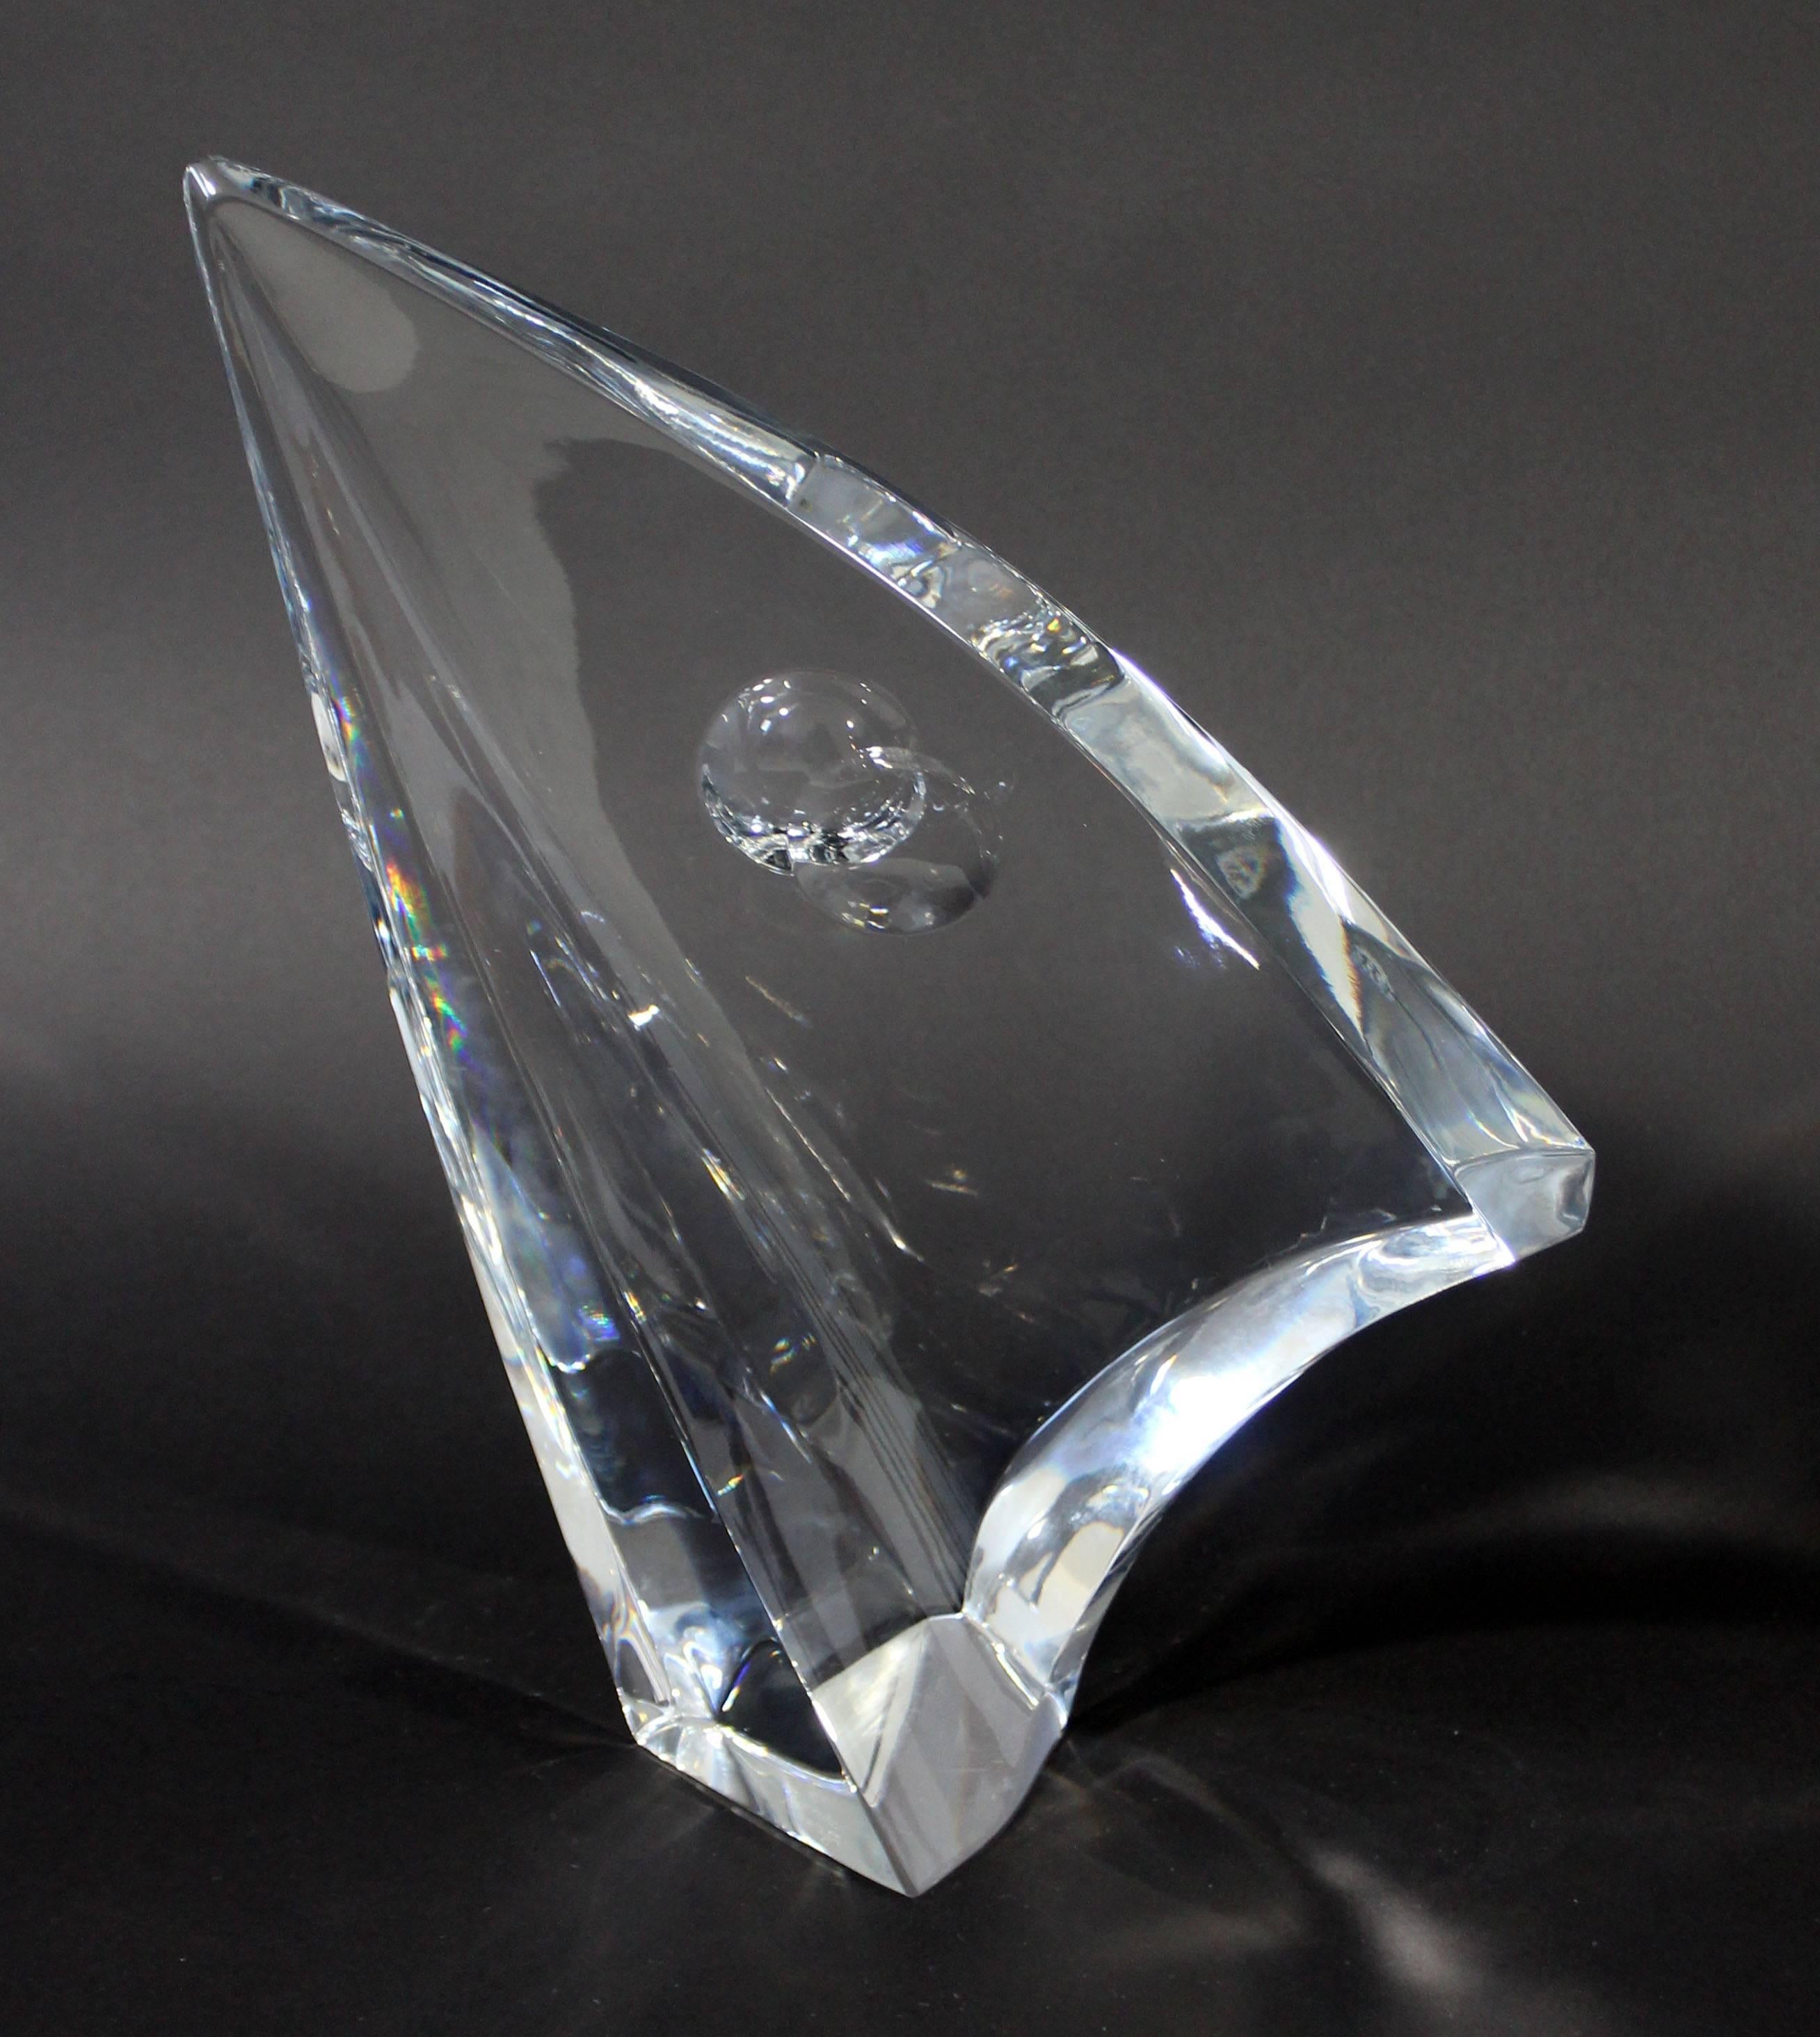 For your consideration is this Rare Baccarat full-lead crystal voile sail sculpture by Robert Rigot. This France exclusive design is from the late 1980’s, and is double signed. This stunning piece is in excellent condition and measures in at